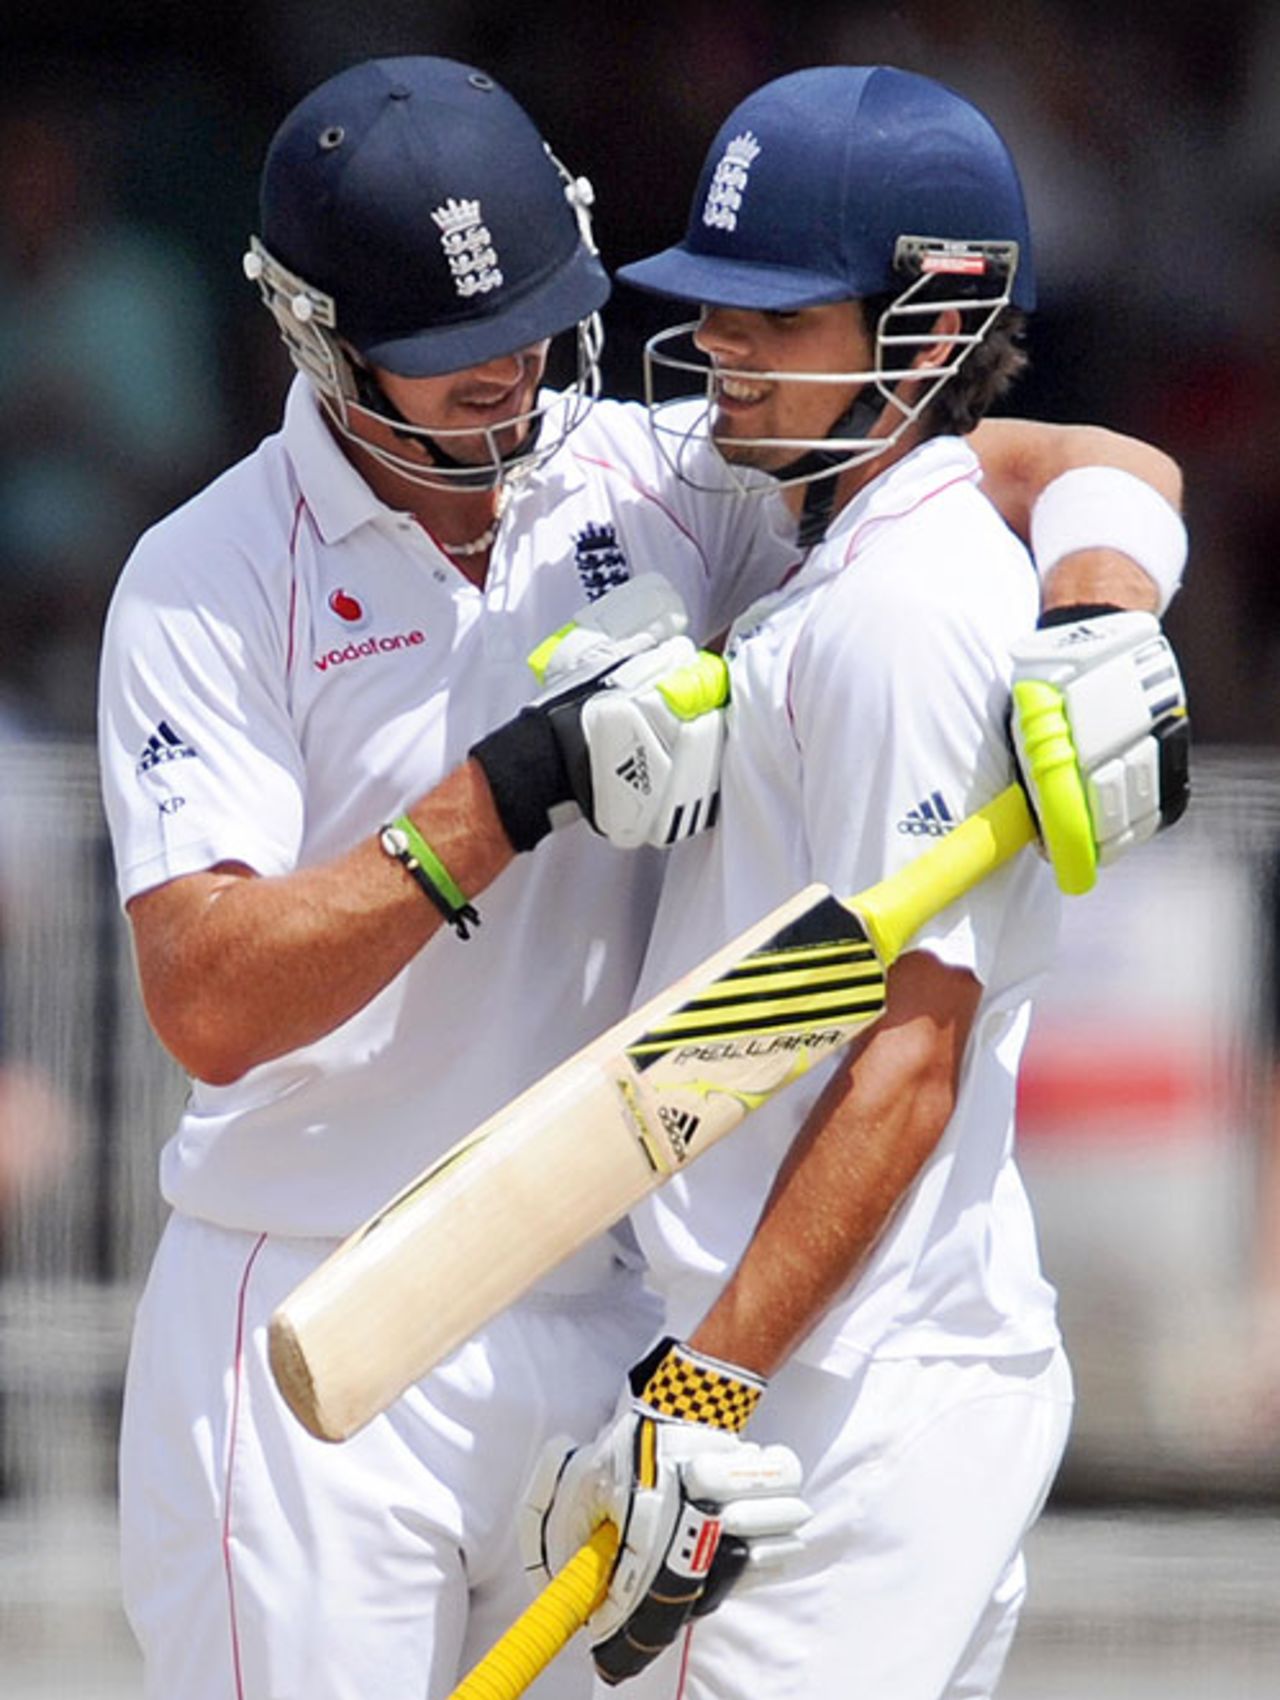 Kevin Pietersen congratulates Alastair Cook on reaching his second fifty of the match, West Indies v England, 3rd Test, Antigua, 4th day, February 18, 2009